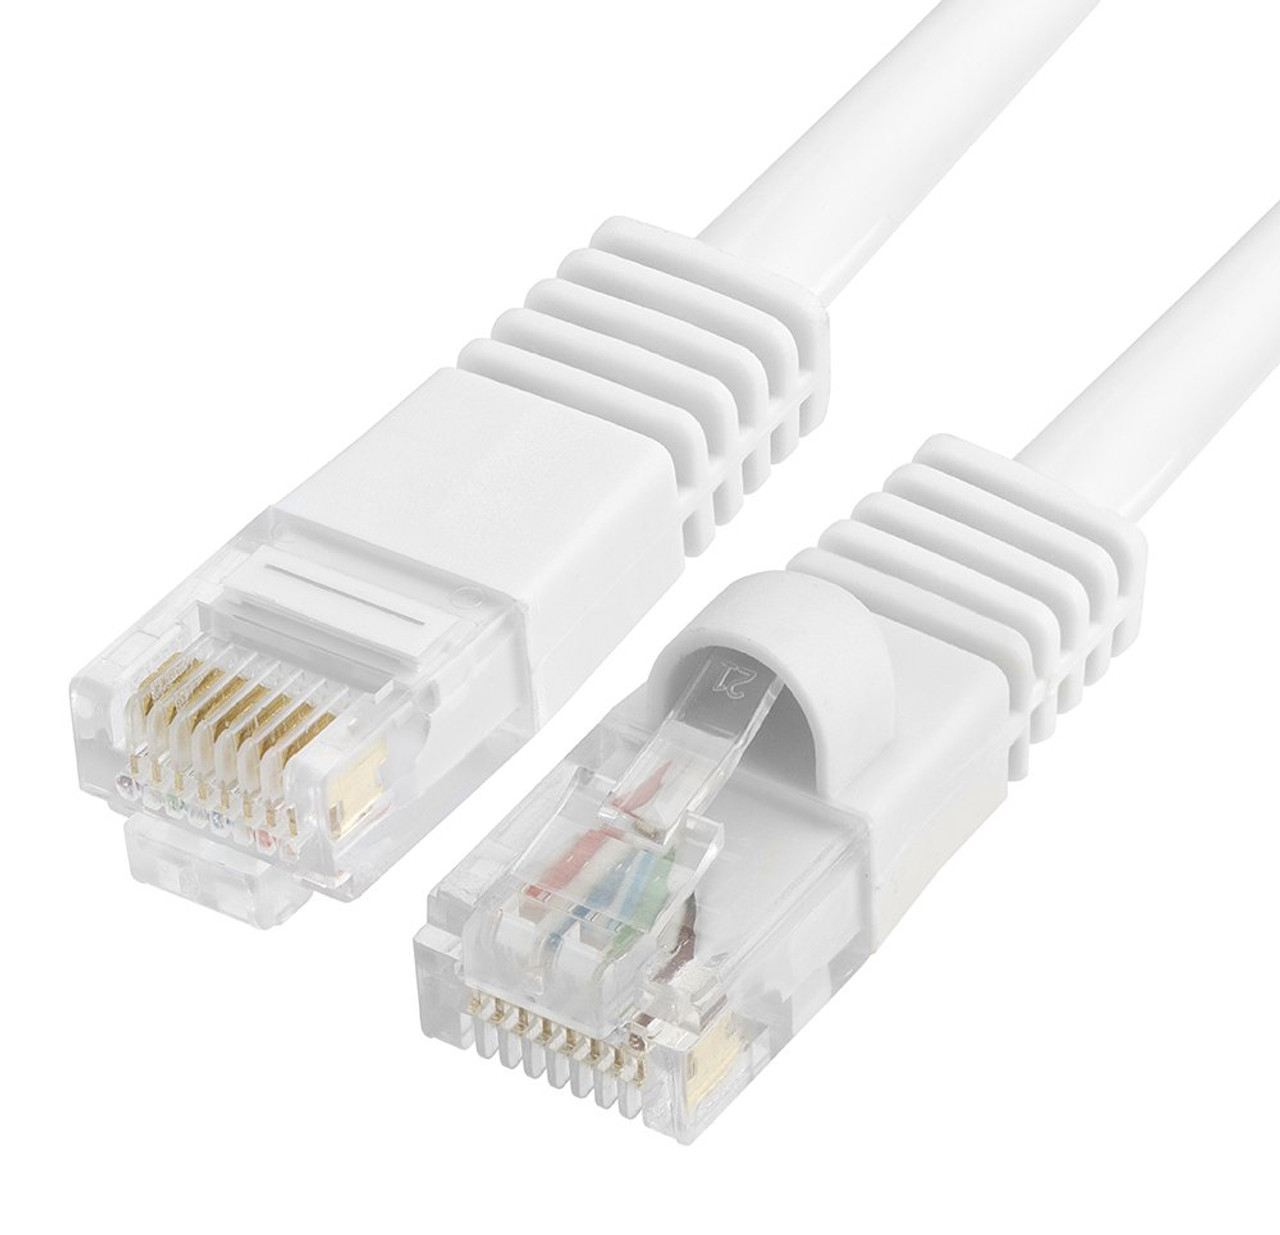 Cat5e Network Ethernet Cable - Computer LAN Cable 1Gbps - 350 MHz, Gold Plated RJ45 Connectors - 25 Feet White